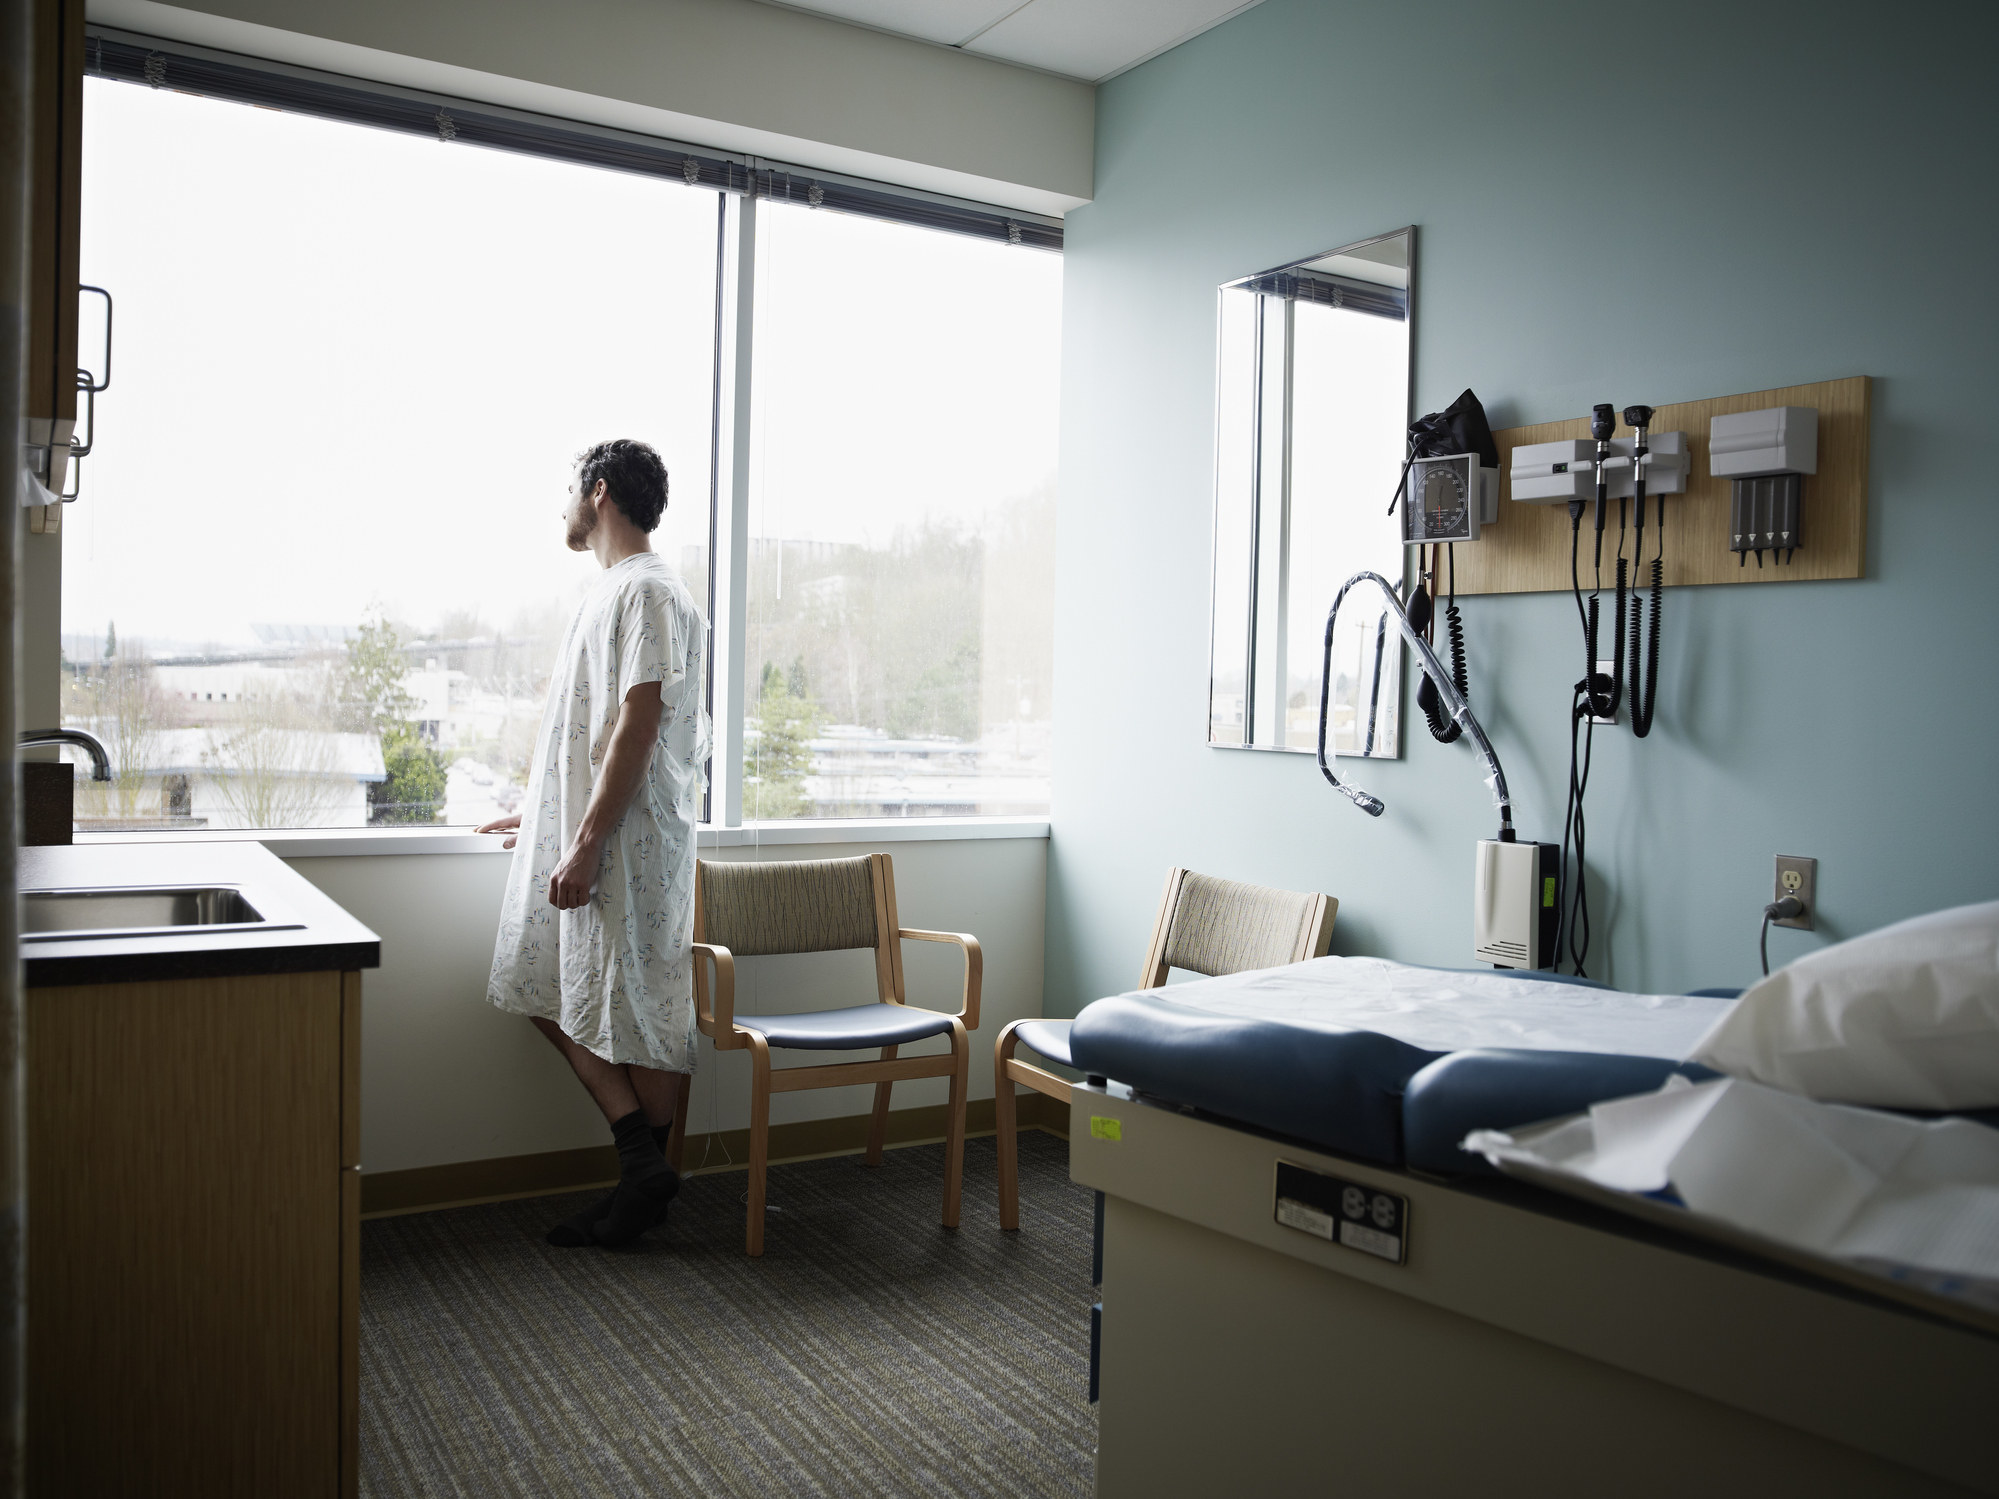 a man in a hospital gown looking out the window of the exam room